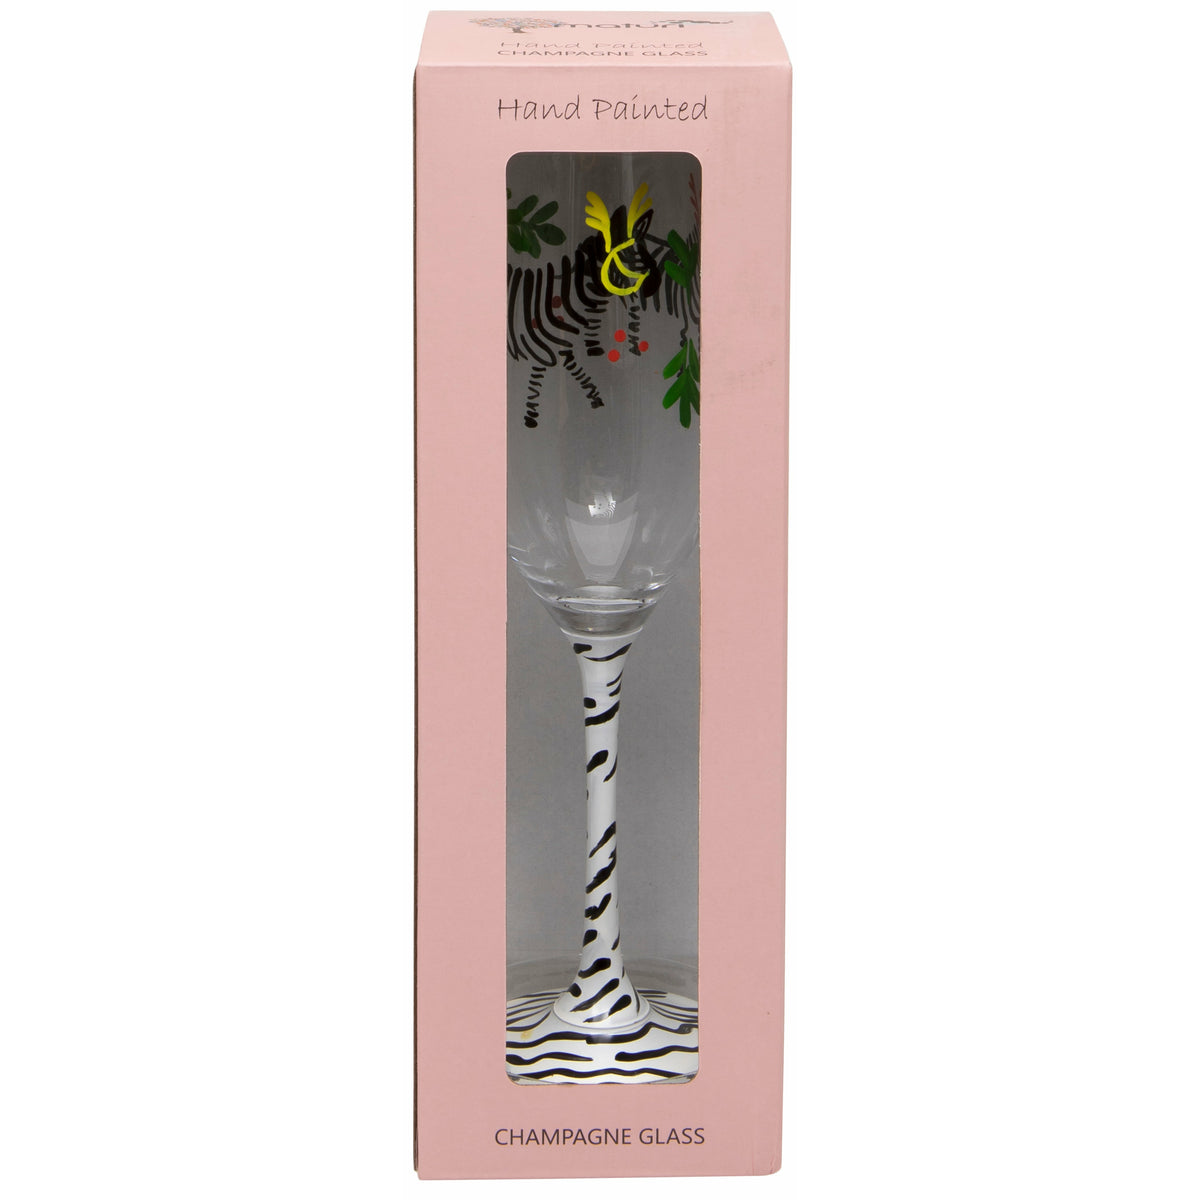 Hand Painted Zebra Champagne Flute in Box